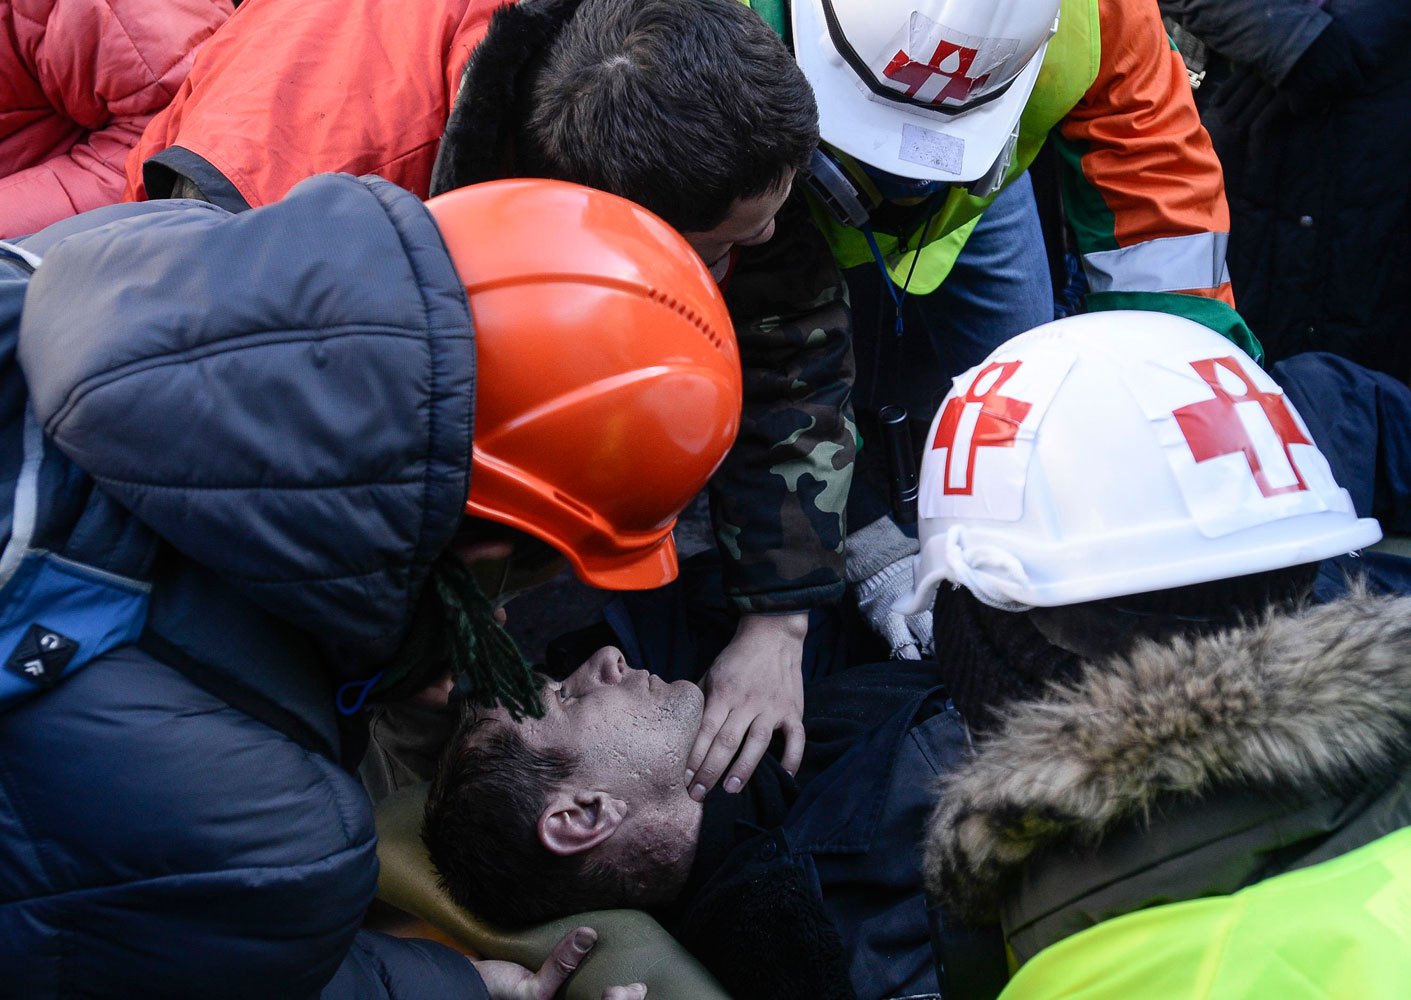 An Interior Ministry member, who was injured during clashes with anti-government protesters, receives medical treatment as he lies on a stretcher in Kiev February 18, 2014.